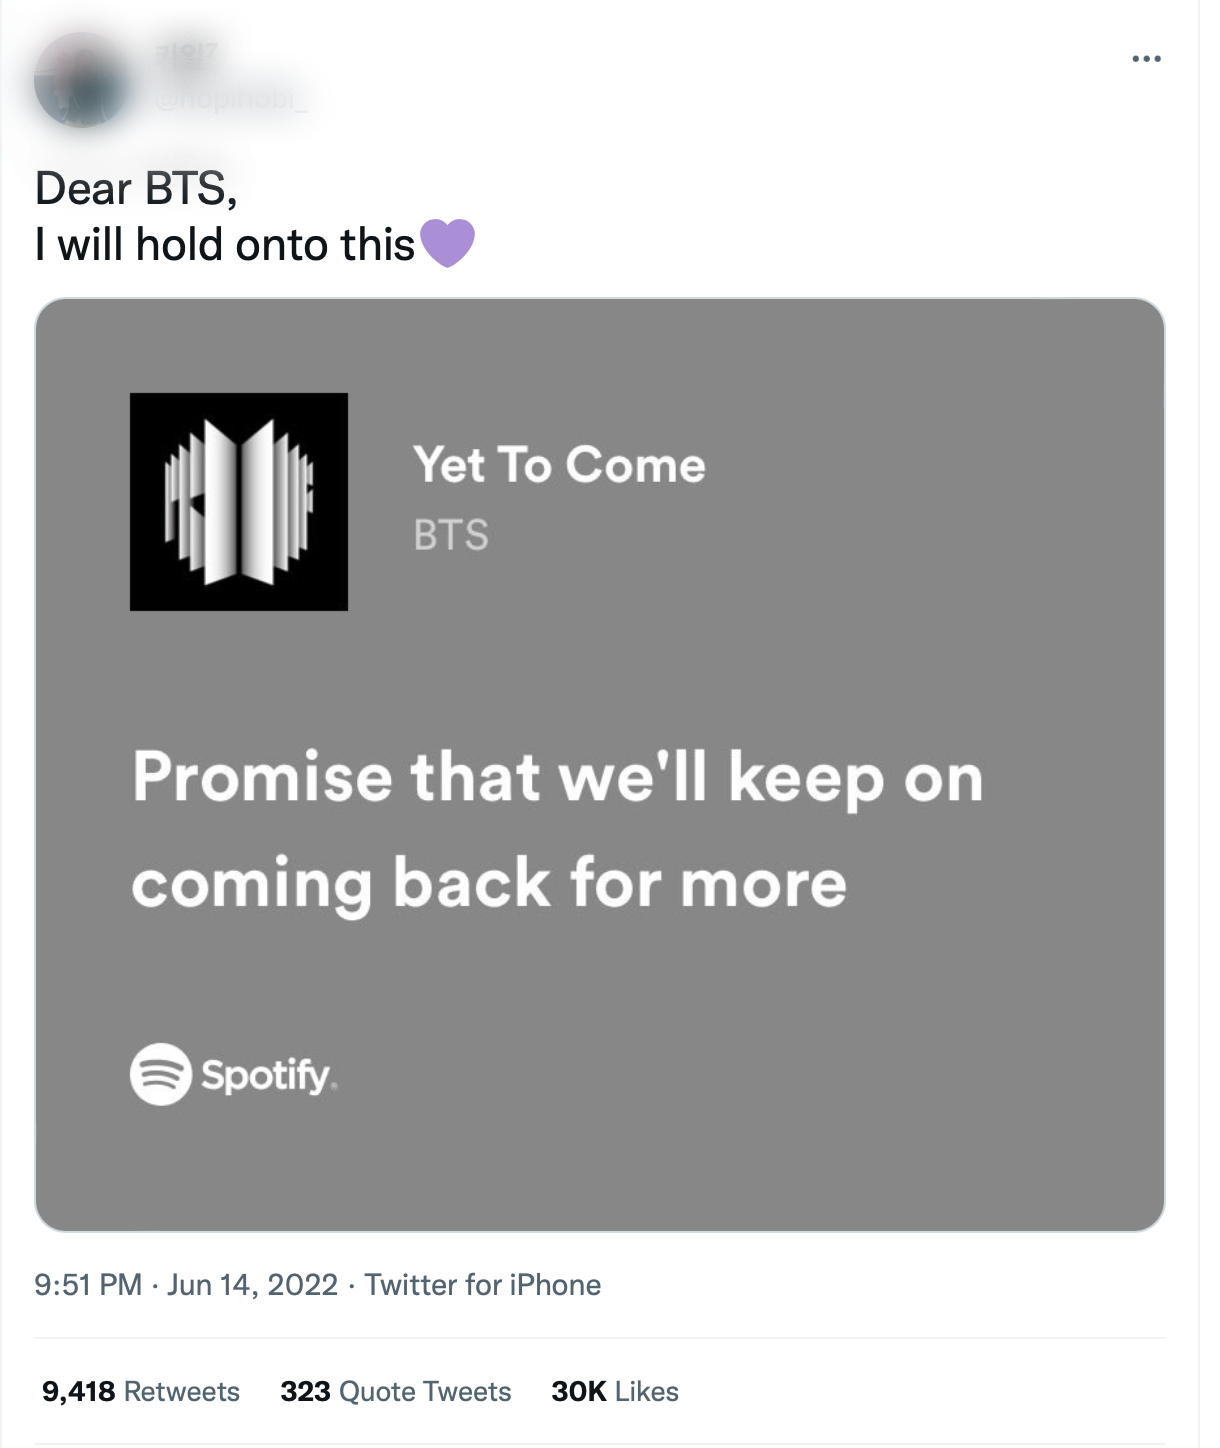 Bts announced that they're taking a break